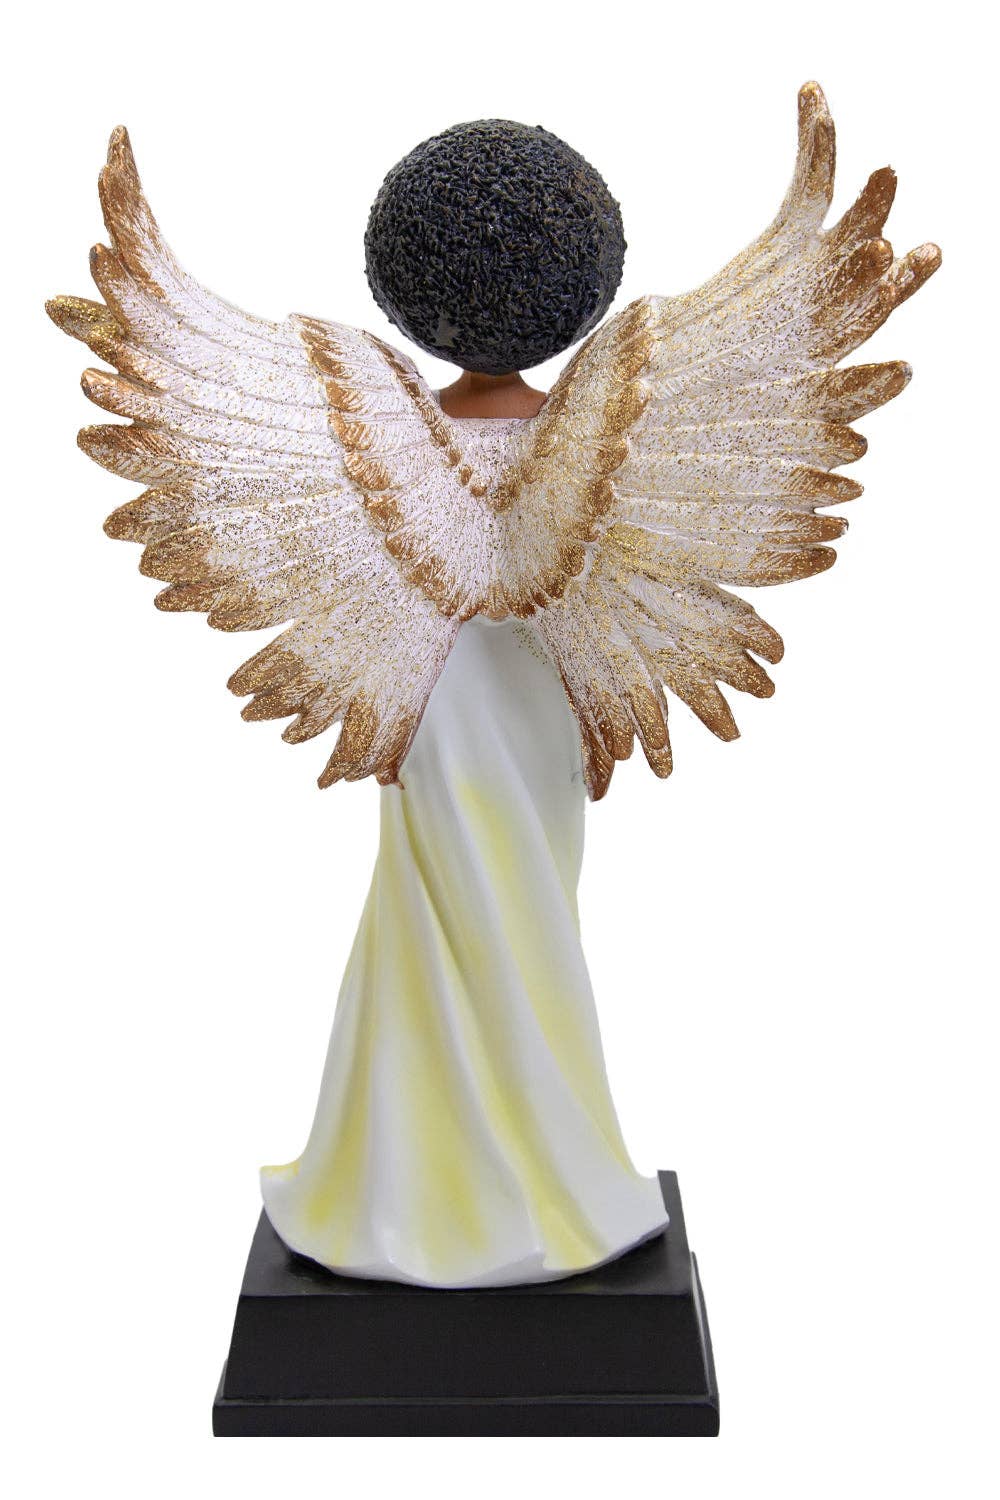 African American Expressions - FAN03 Golden Angel Figurine w/ Glitter Accents